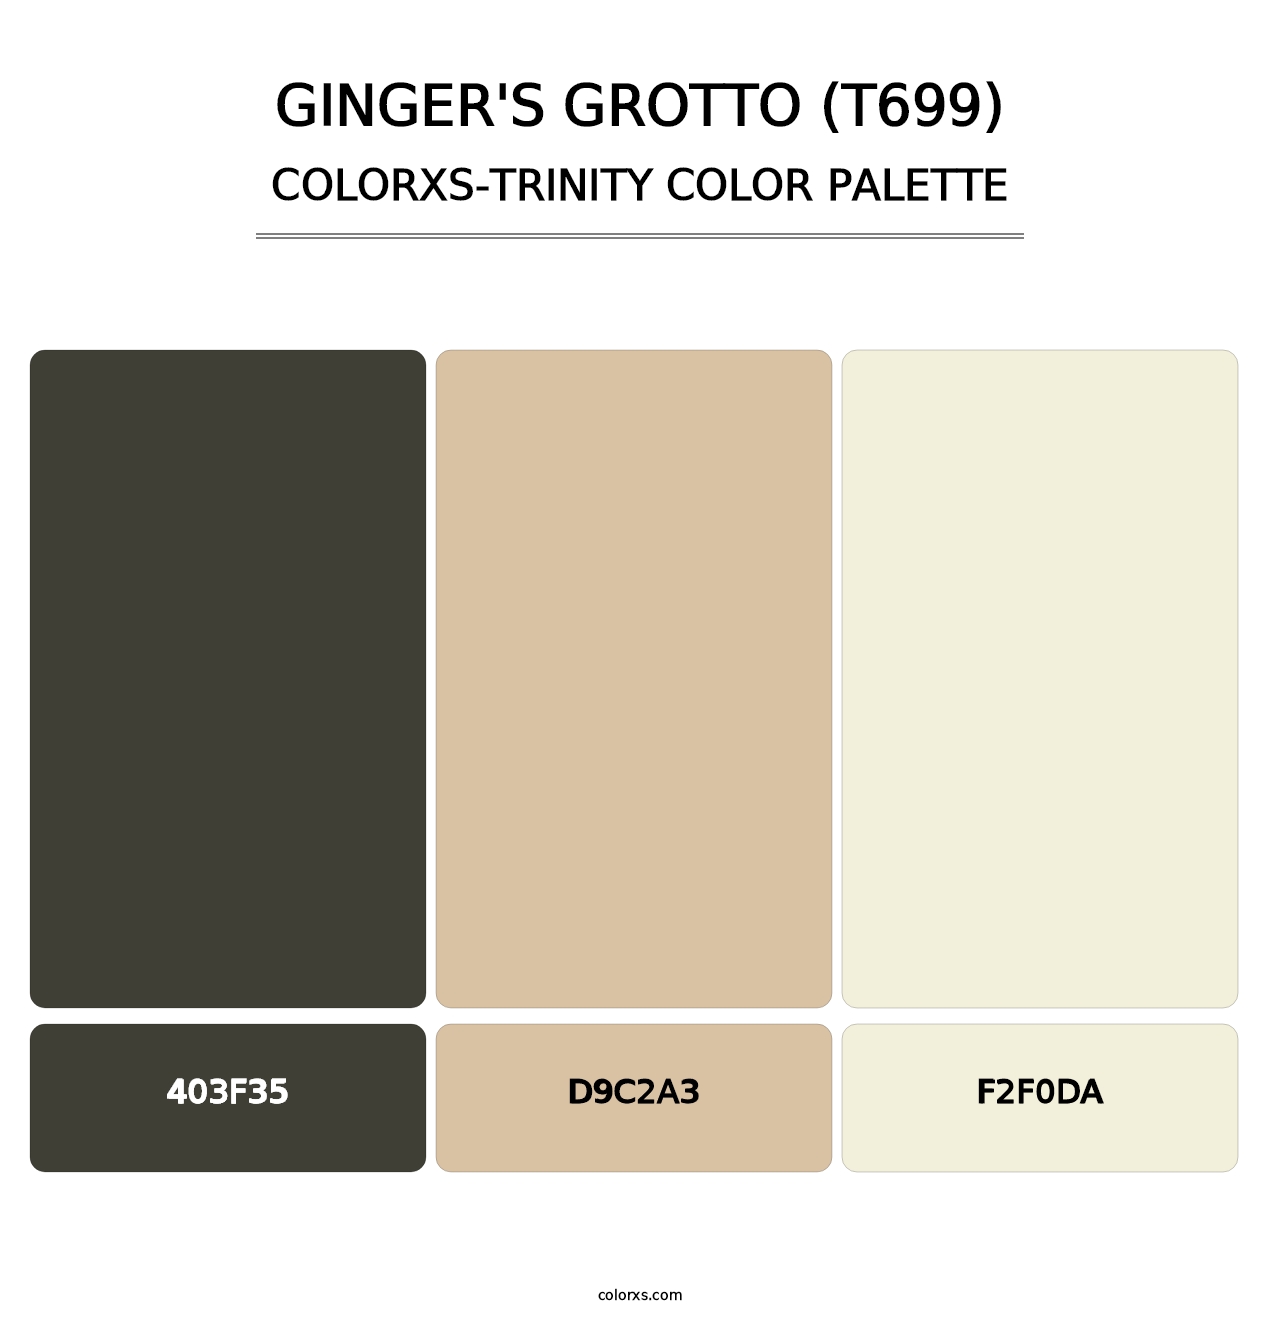 Ginger's Grotto (T699) - Colorxs Trinity Palette